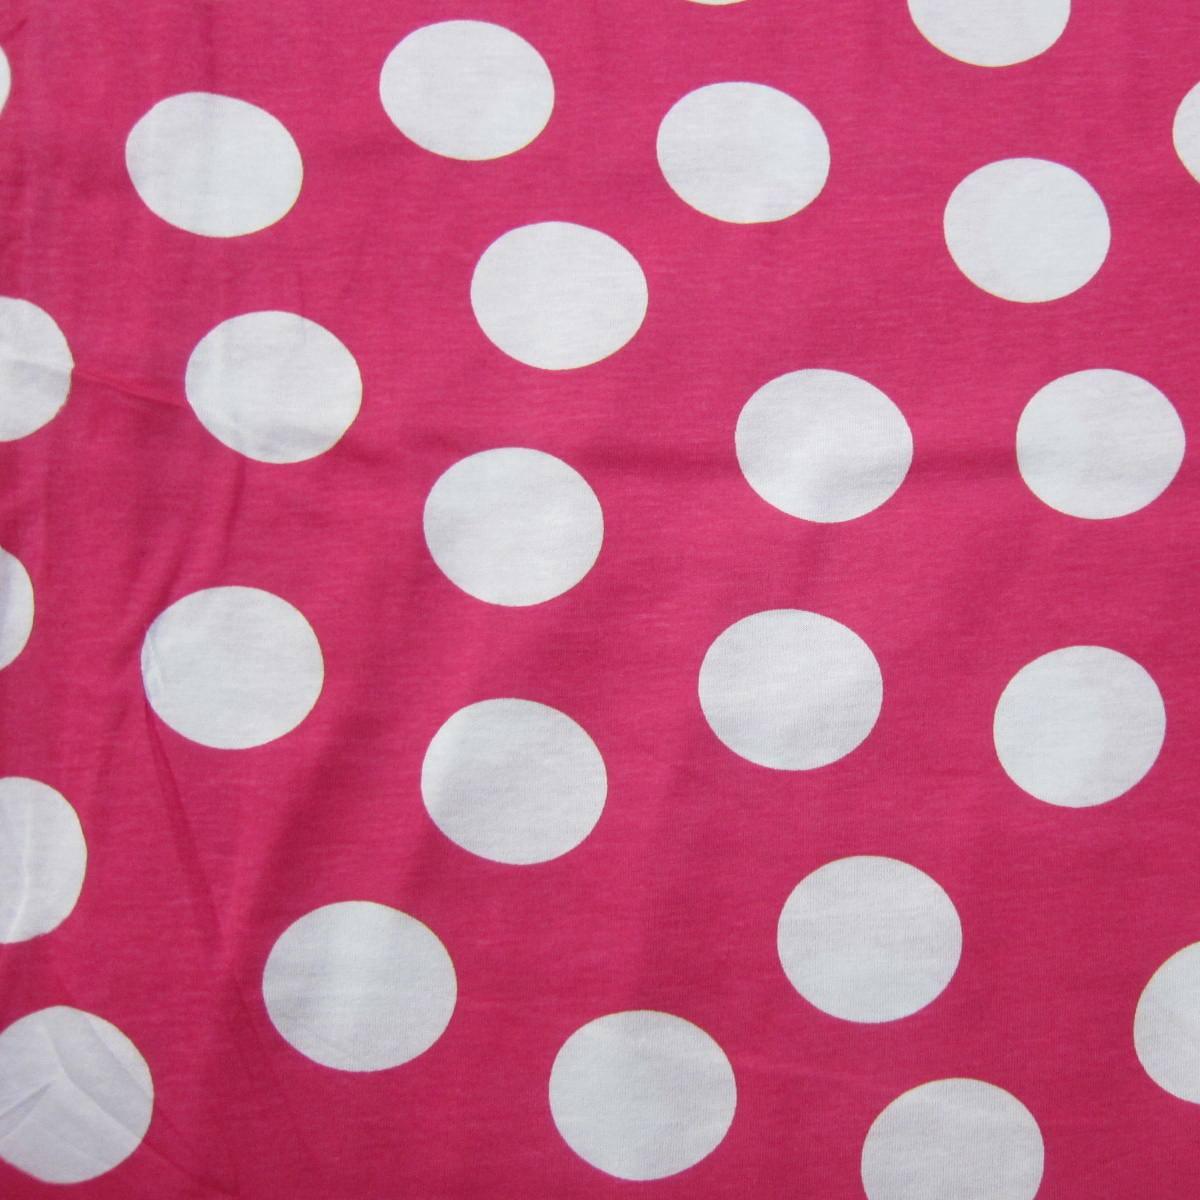 White 1 3/4" Dots on Hot Pink Cotton Jersey 